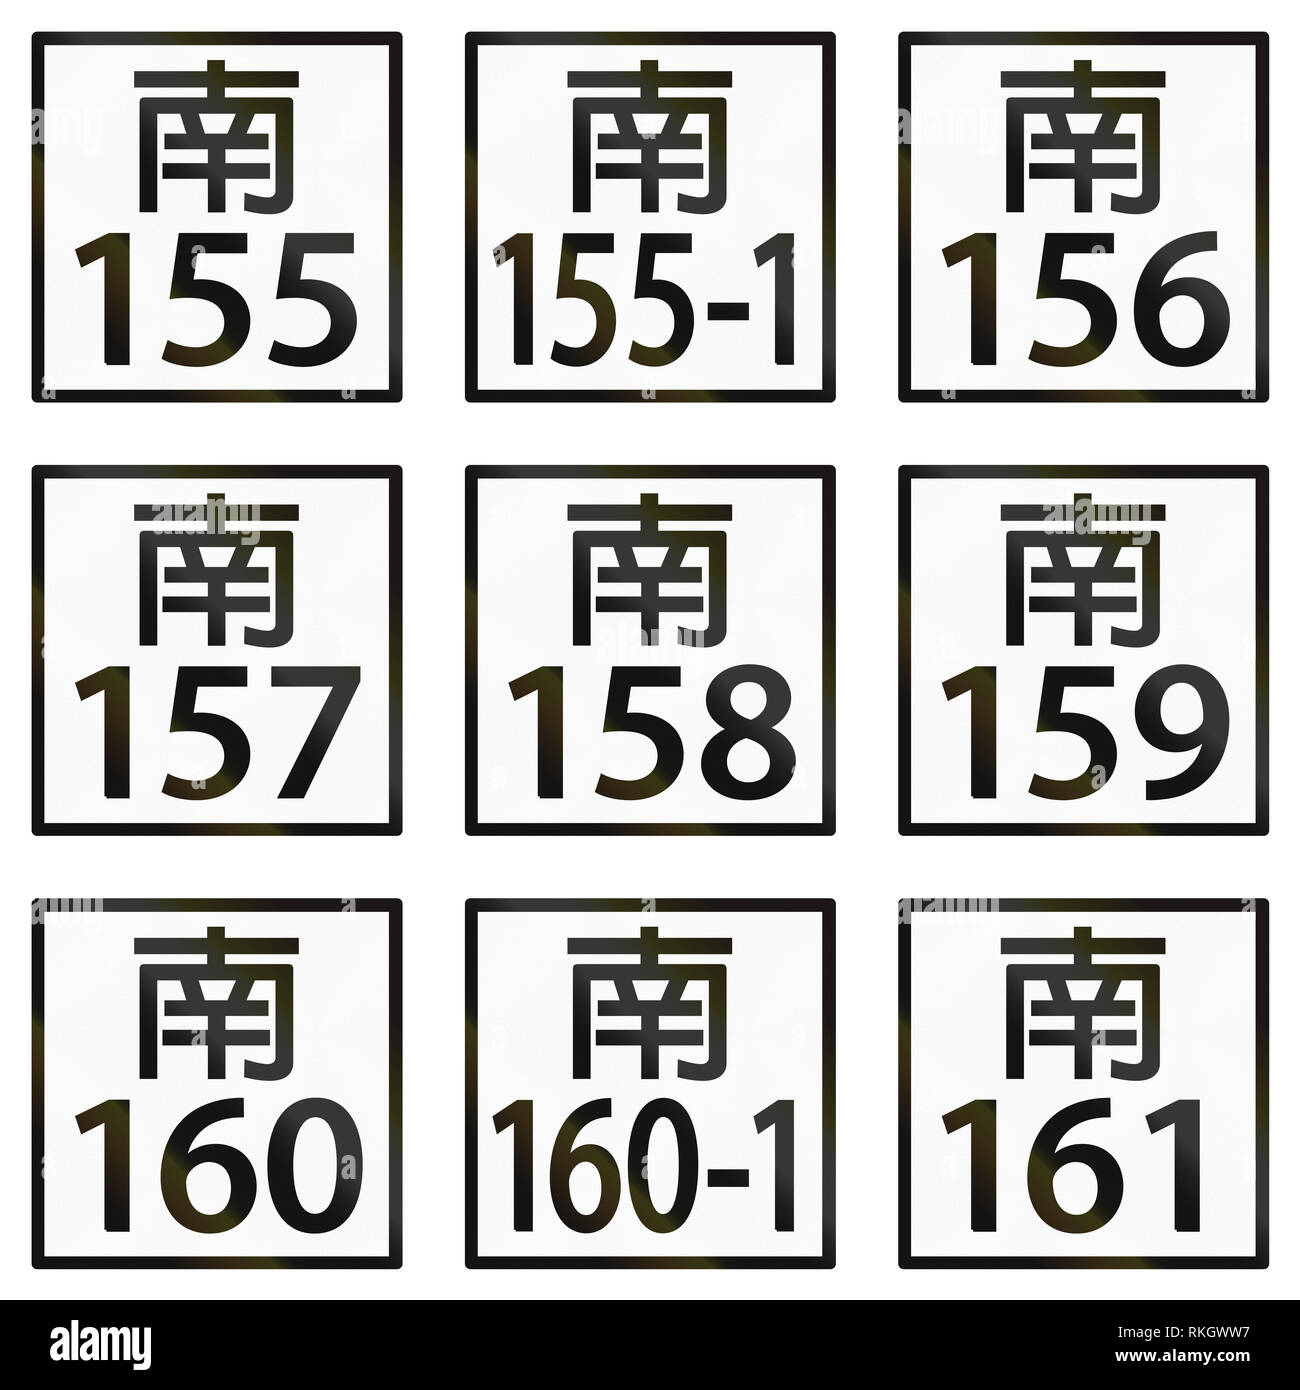 Collection of local township highway signs in Taiwan. Stock Photo